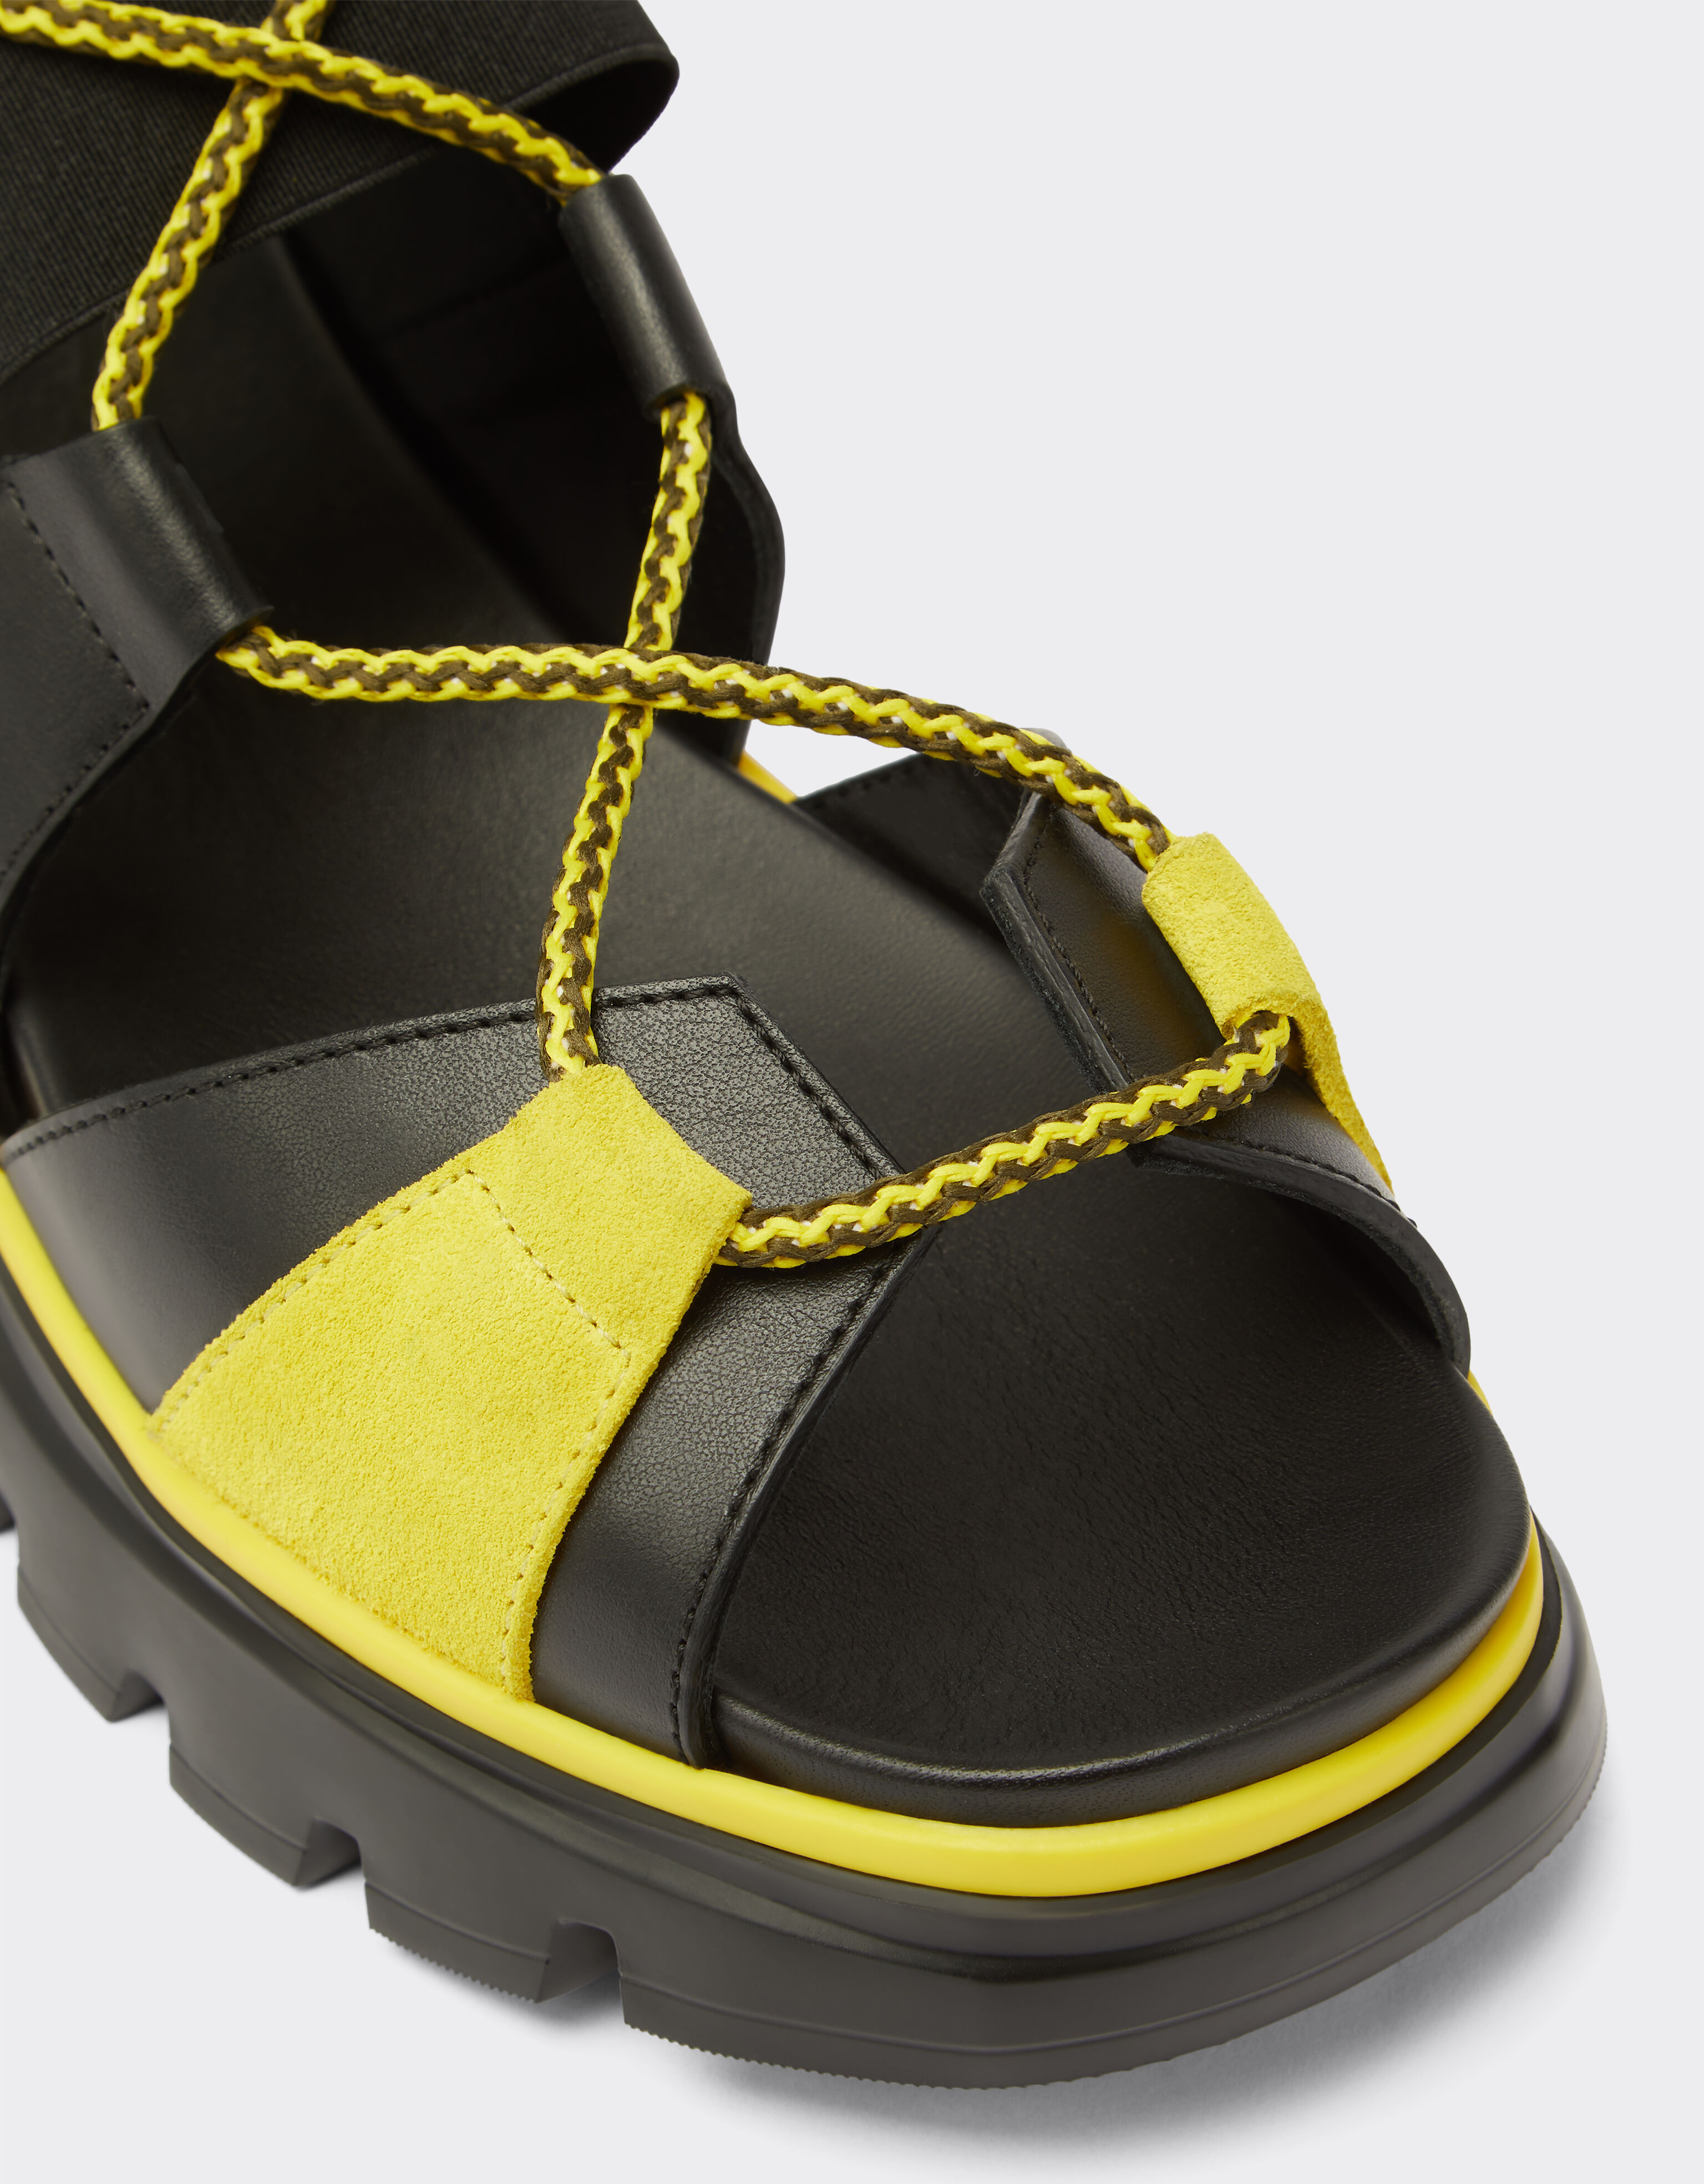 Ferrari Leather and suede sandals with crossover laces Black 20310f